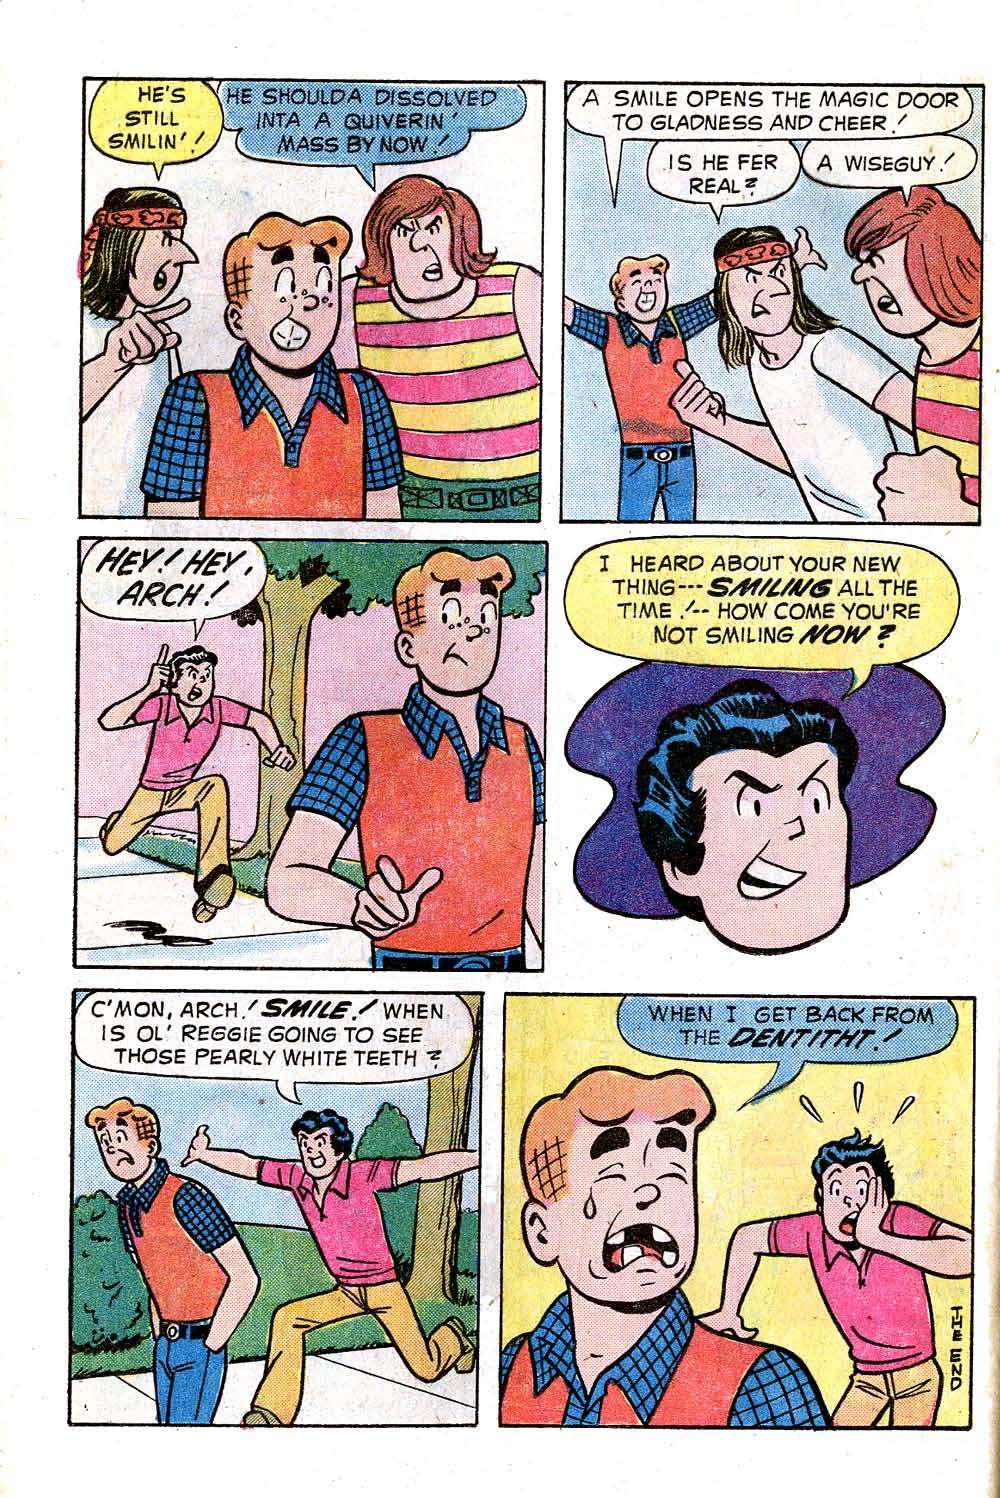 Archie (1960) 249 Page 24